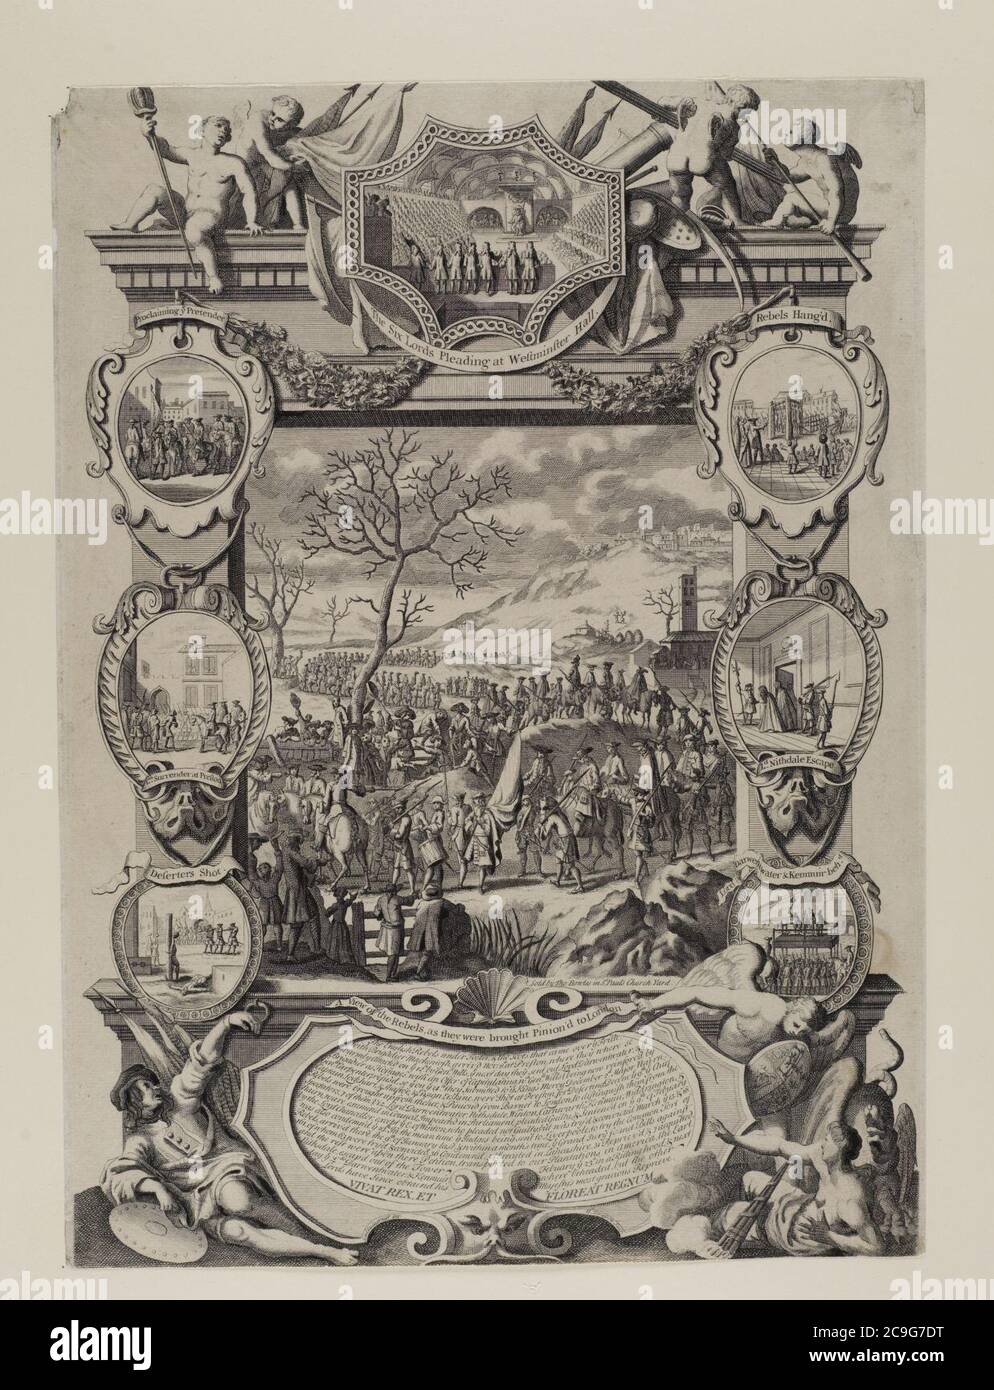 Jacobite broadside - View of the rebels as they were brought pinioned to London. Stock Photo